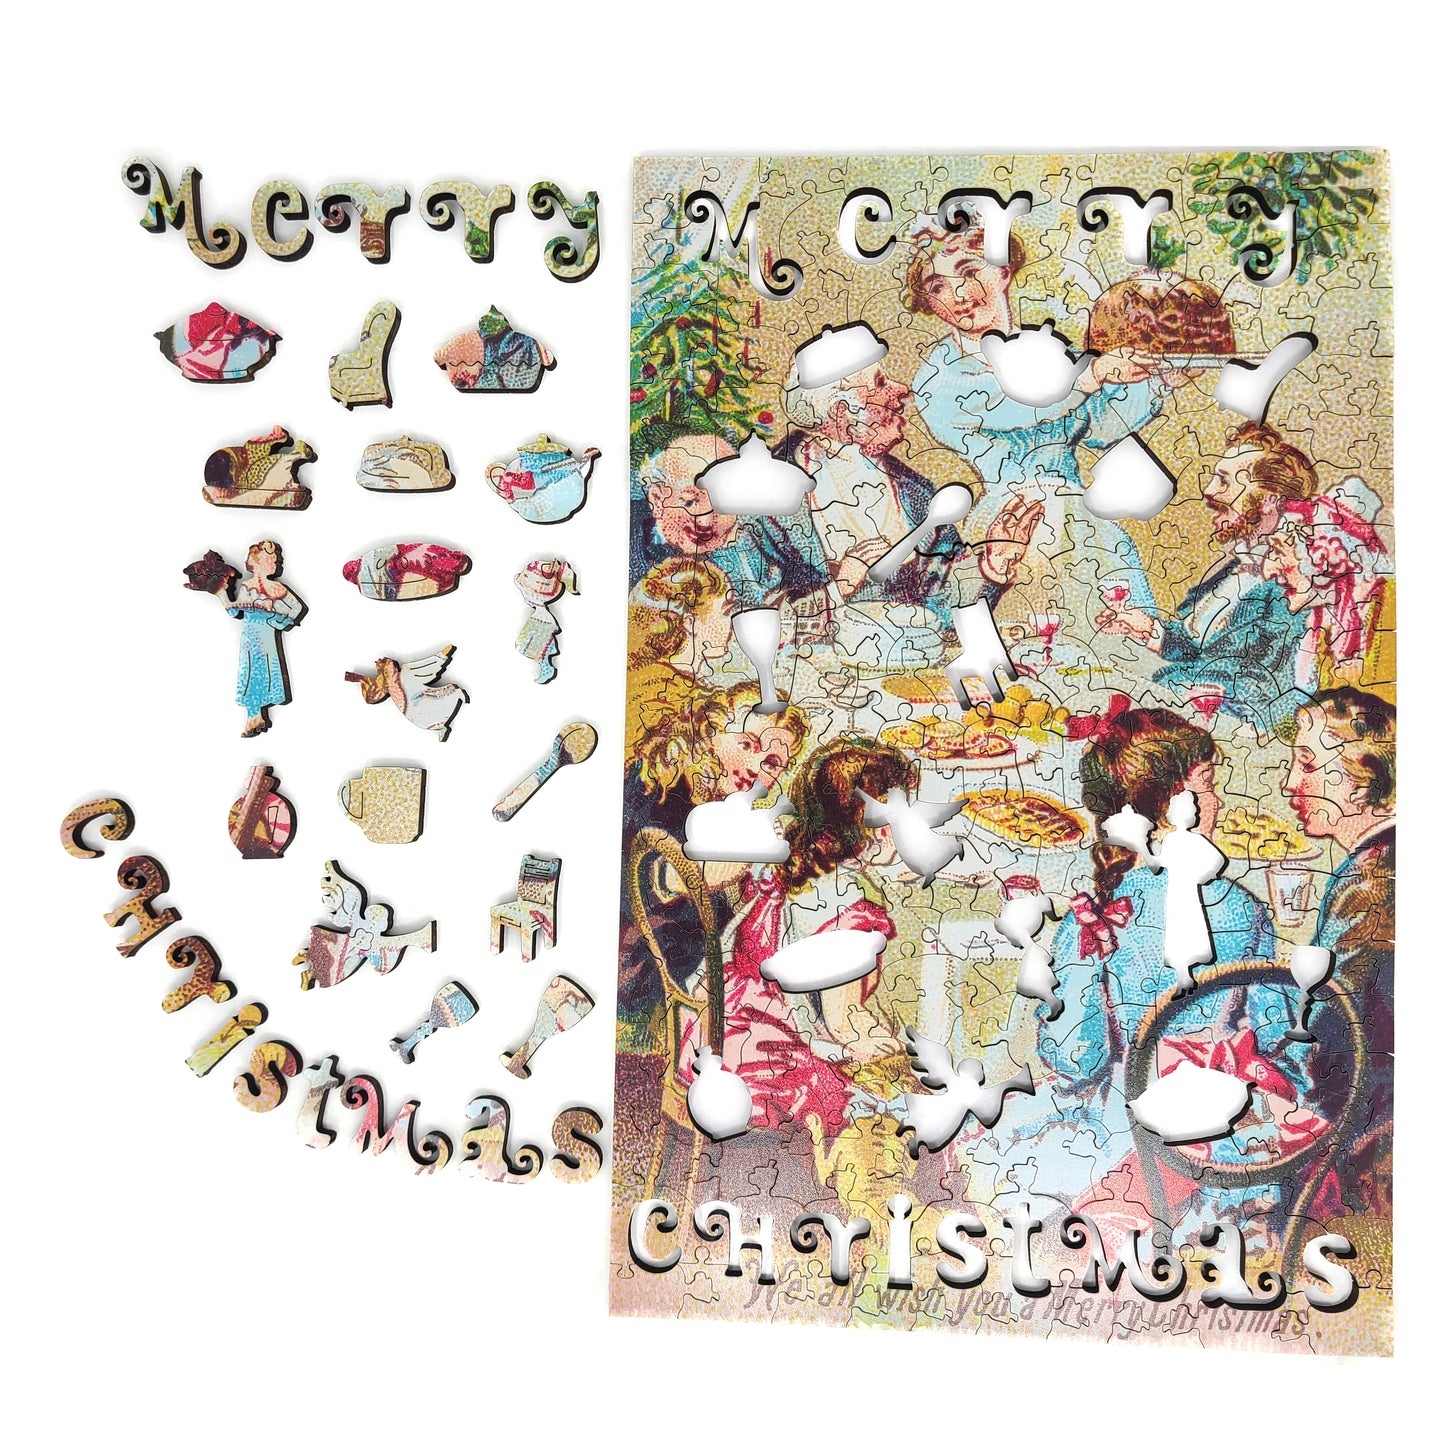 Large Format Wooden Jigsaw Puzzle with Uniquely Shaped Pieces for Seniors and Adults - 205 Pieces - We all wish you a merry Christmas